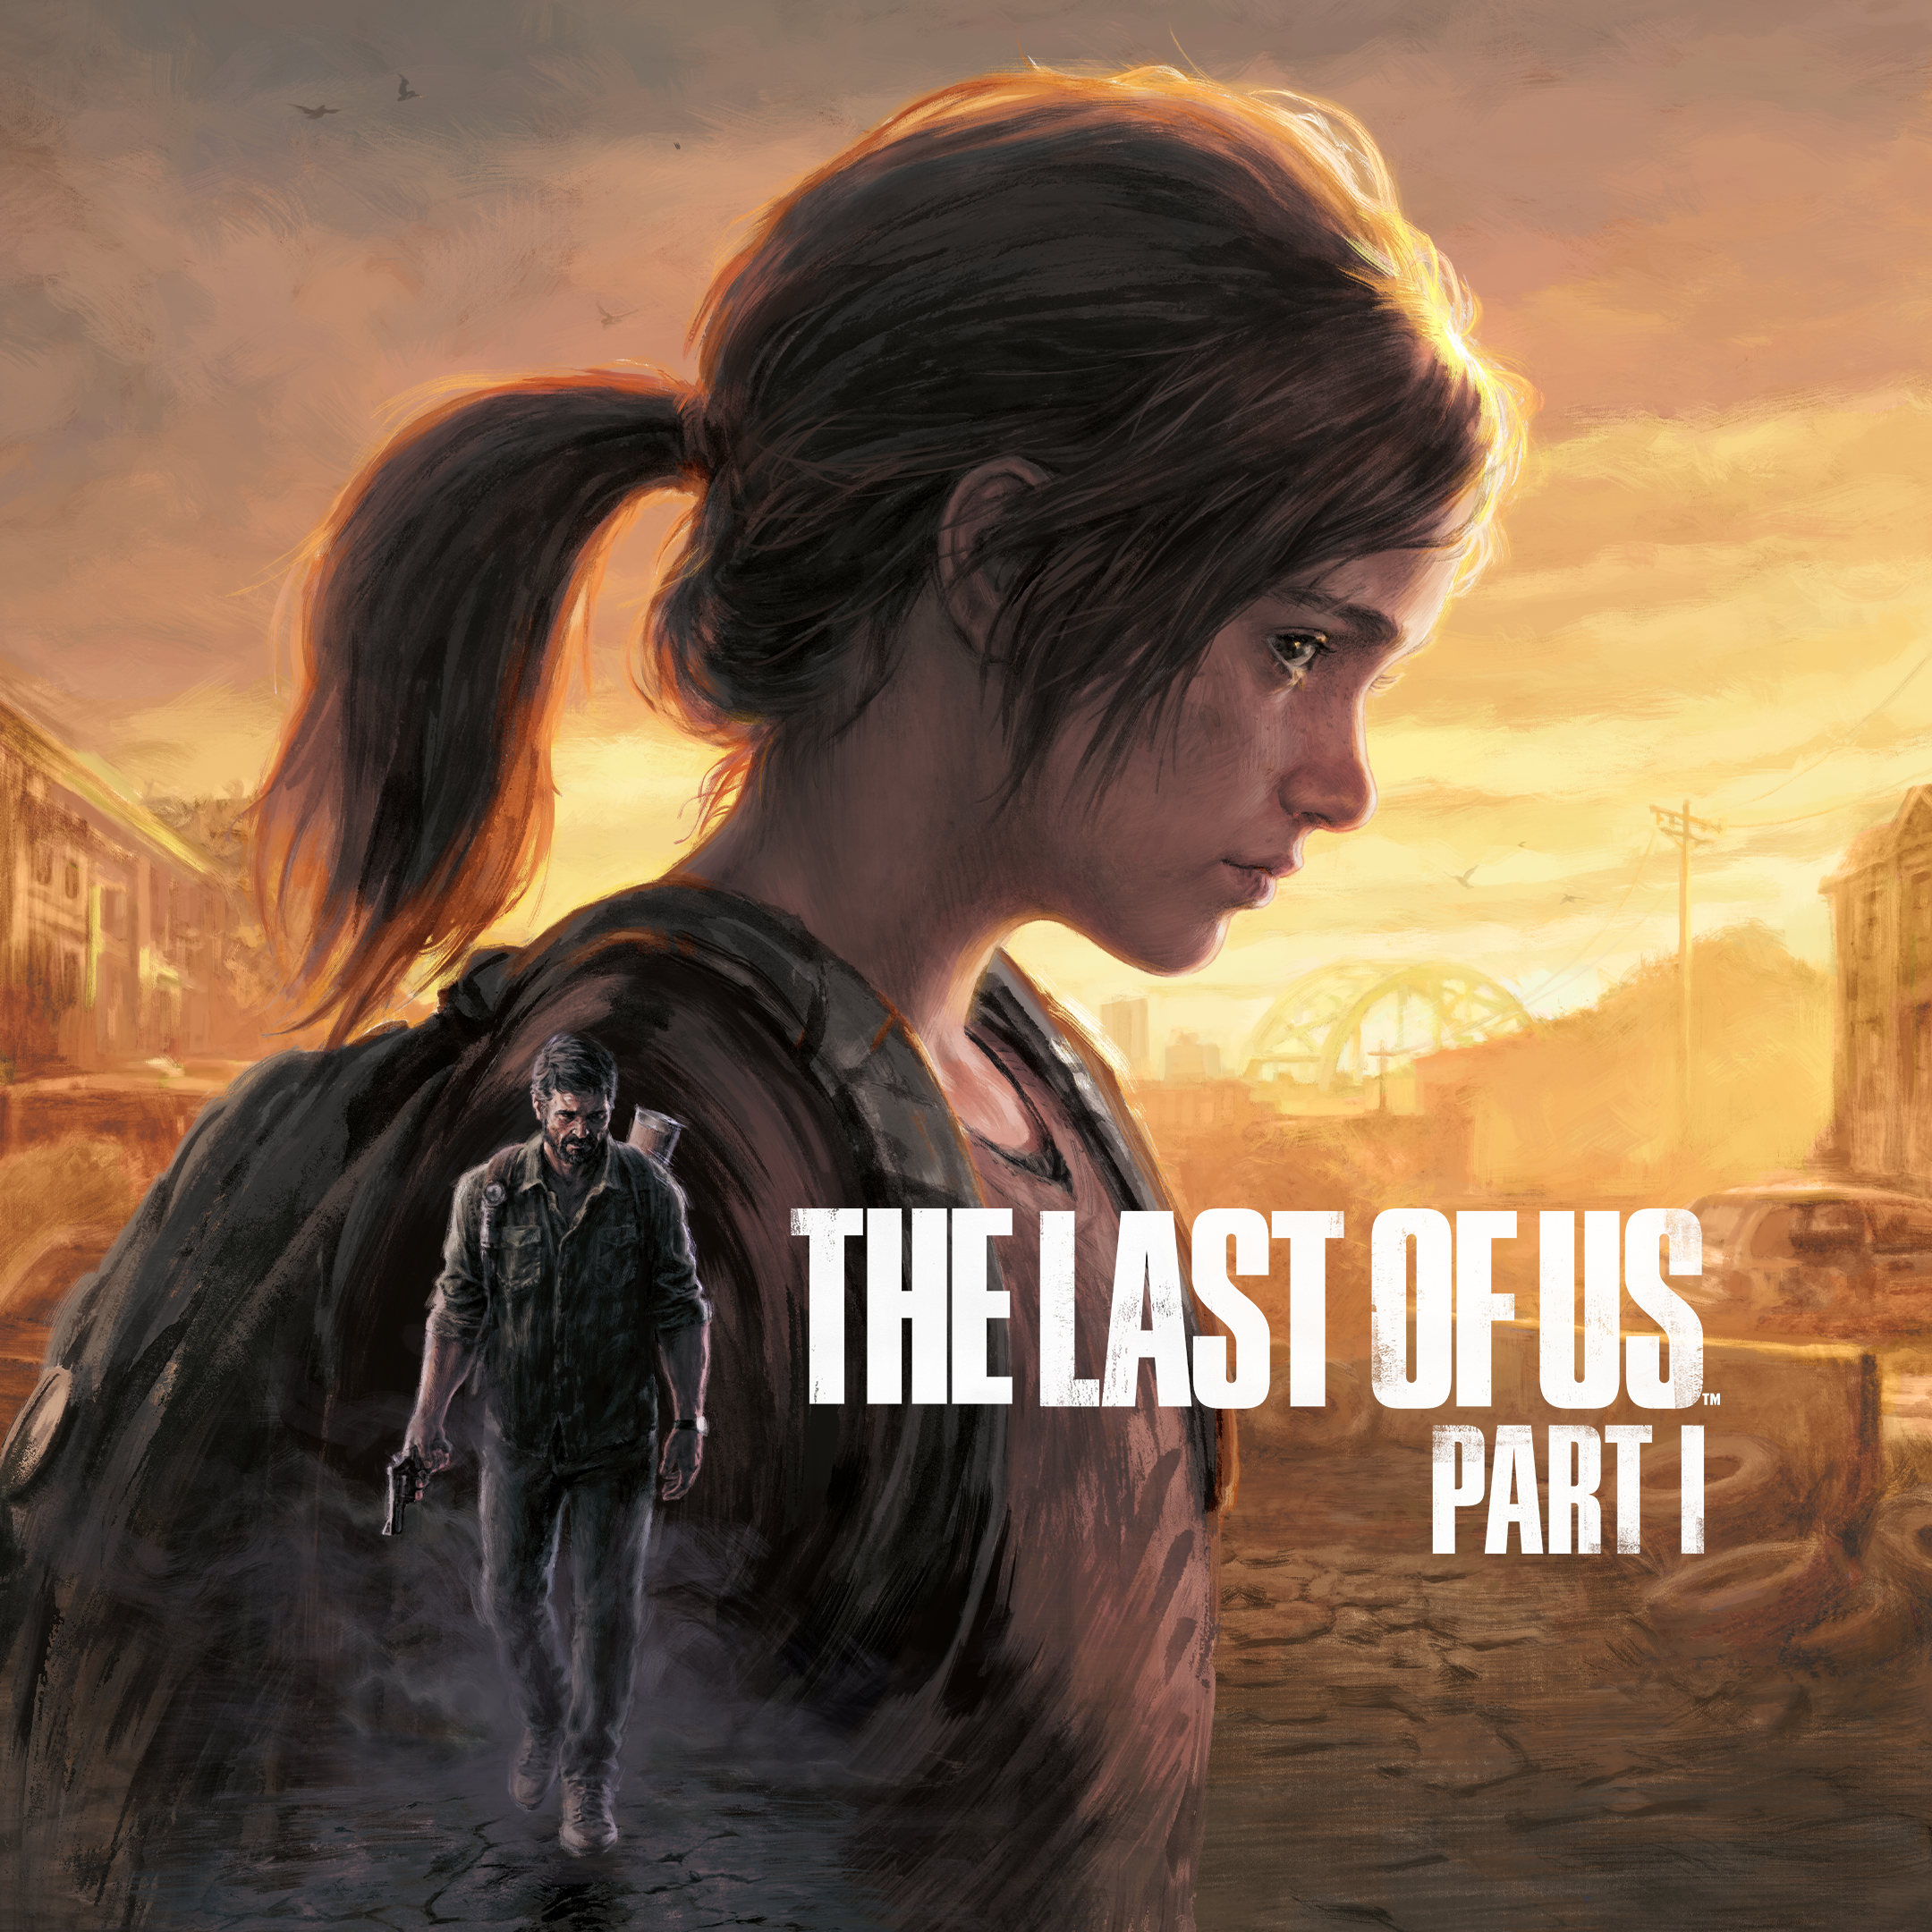 The Last of Us Part II COVER PS5 FANART my creation ツ : r/thelastofus